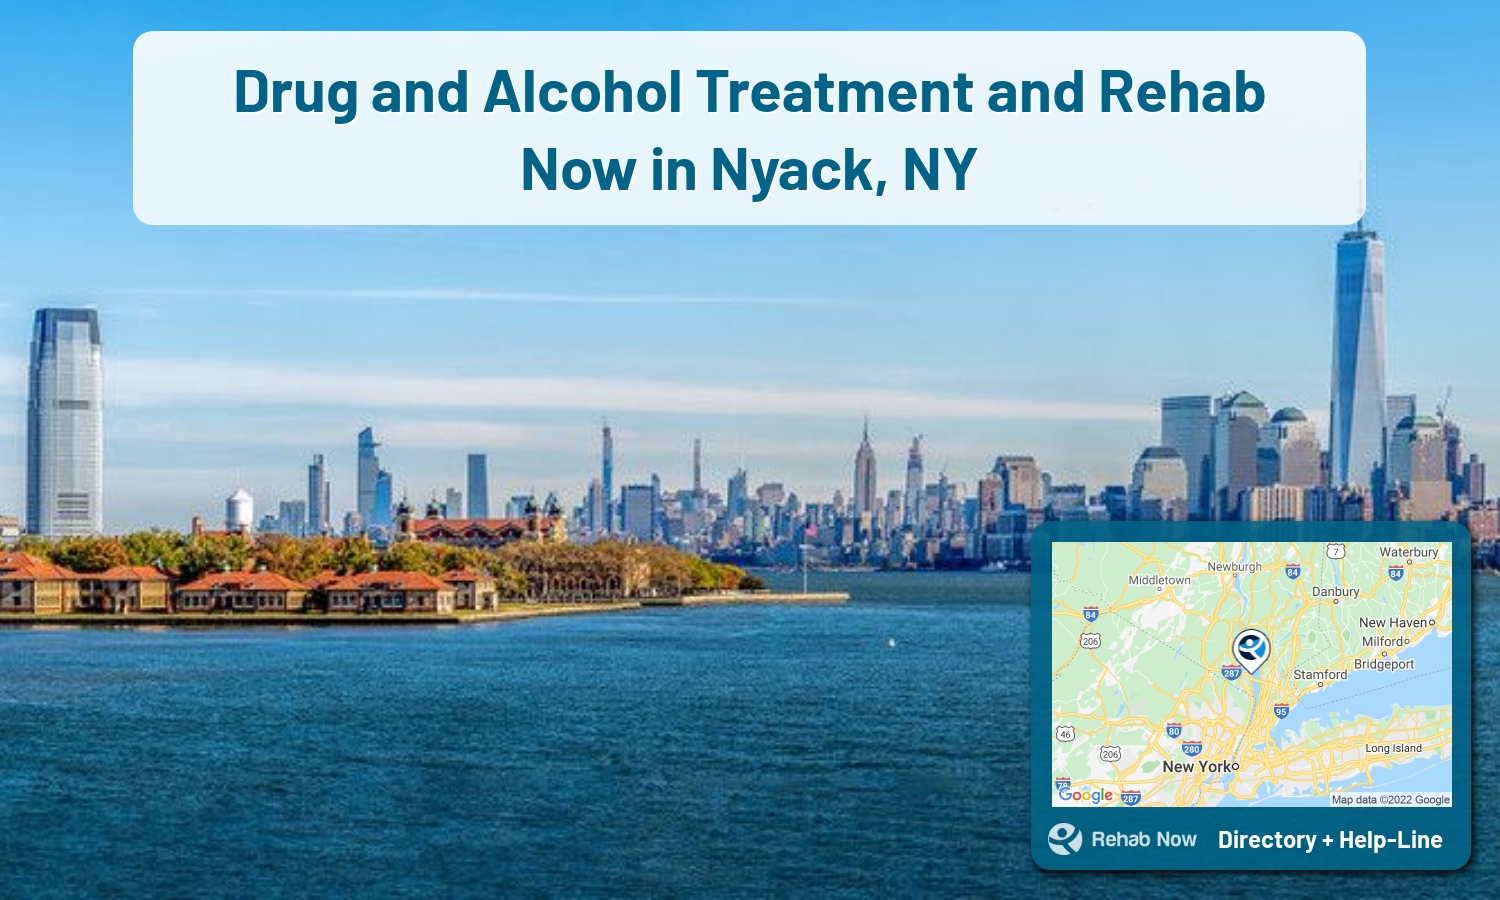 Nyack, NY Treatment Centers. Find drug rehab in Nyack, New York, or detox and treatment programs. Get the right help now!